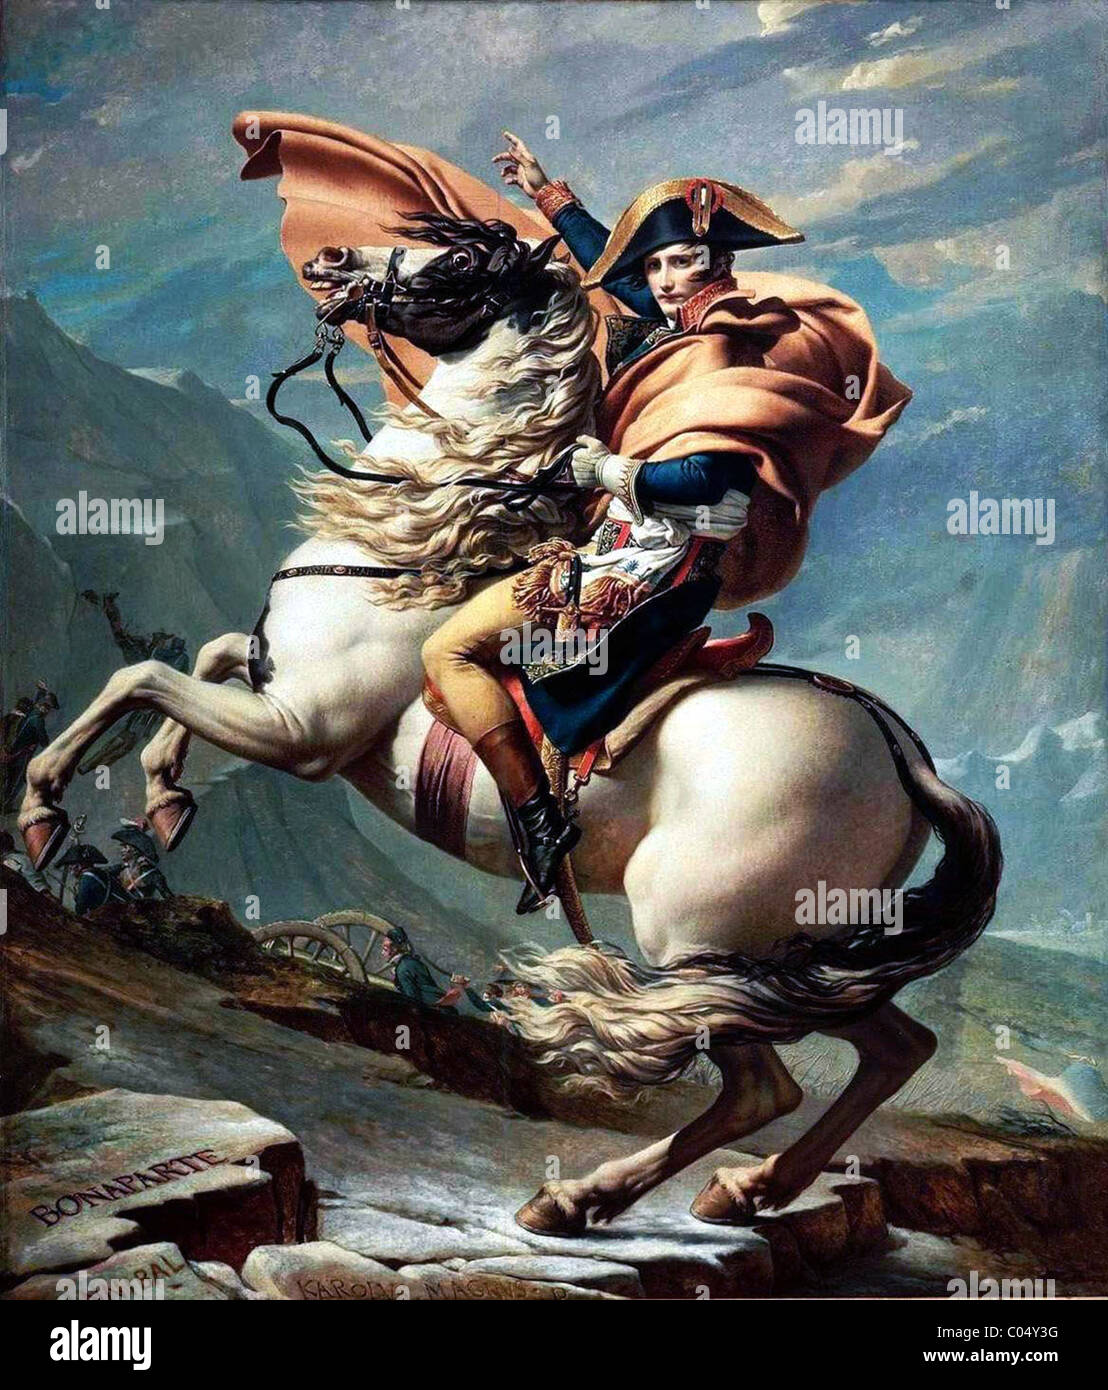 Napoleon Bonaparte, Napoléon Bonaparte, French military leader who rose to prominence during the French Revolution and led several successful campaigns during the French Revolutionary Wars. Napoleon Crossing the Alps by Jacques-Louis David Stock Photo